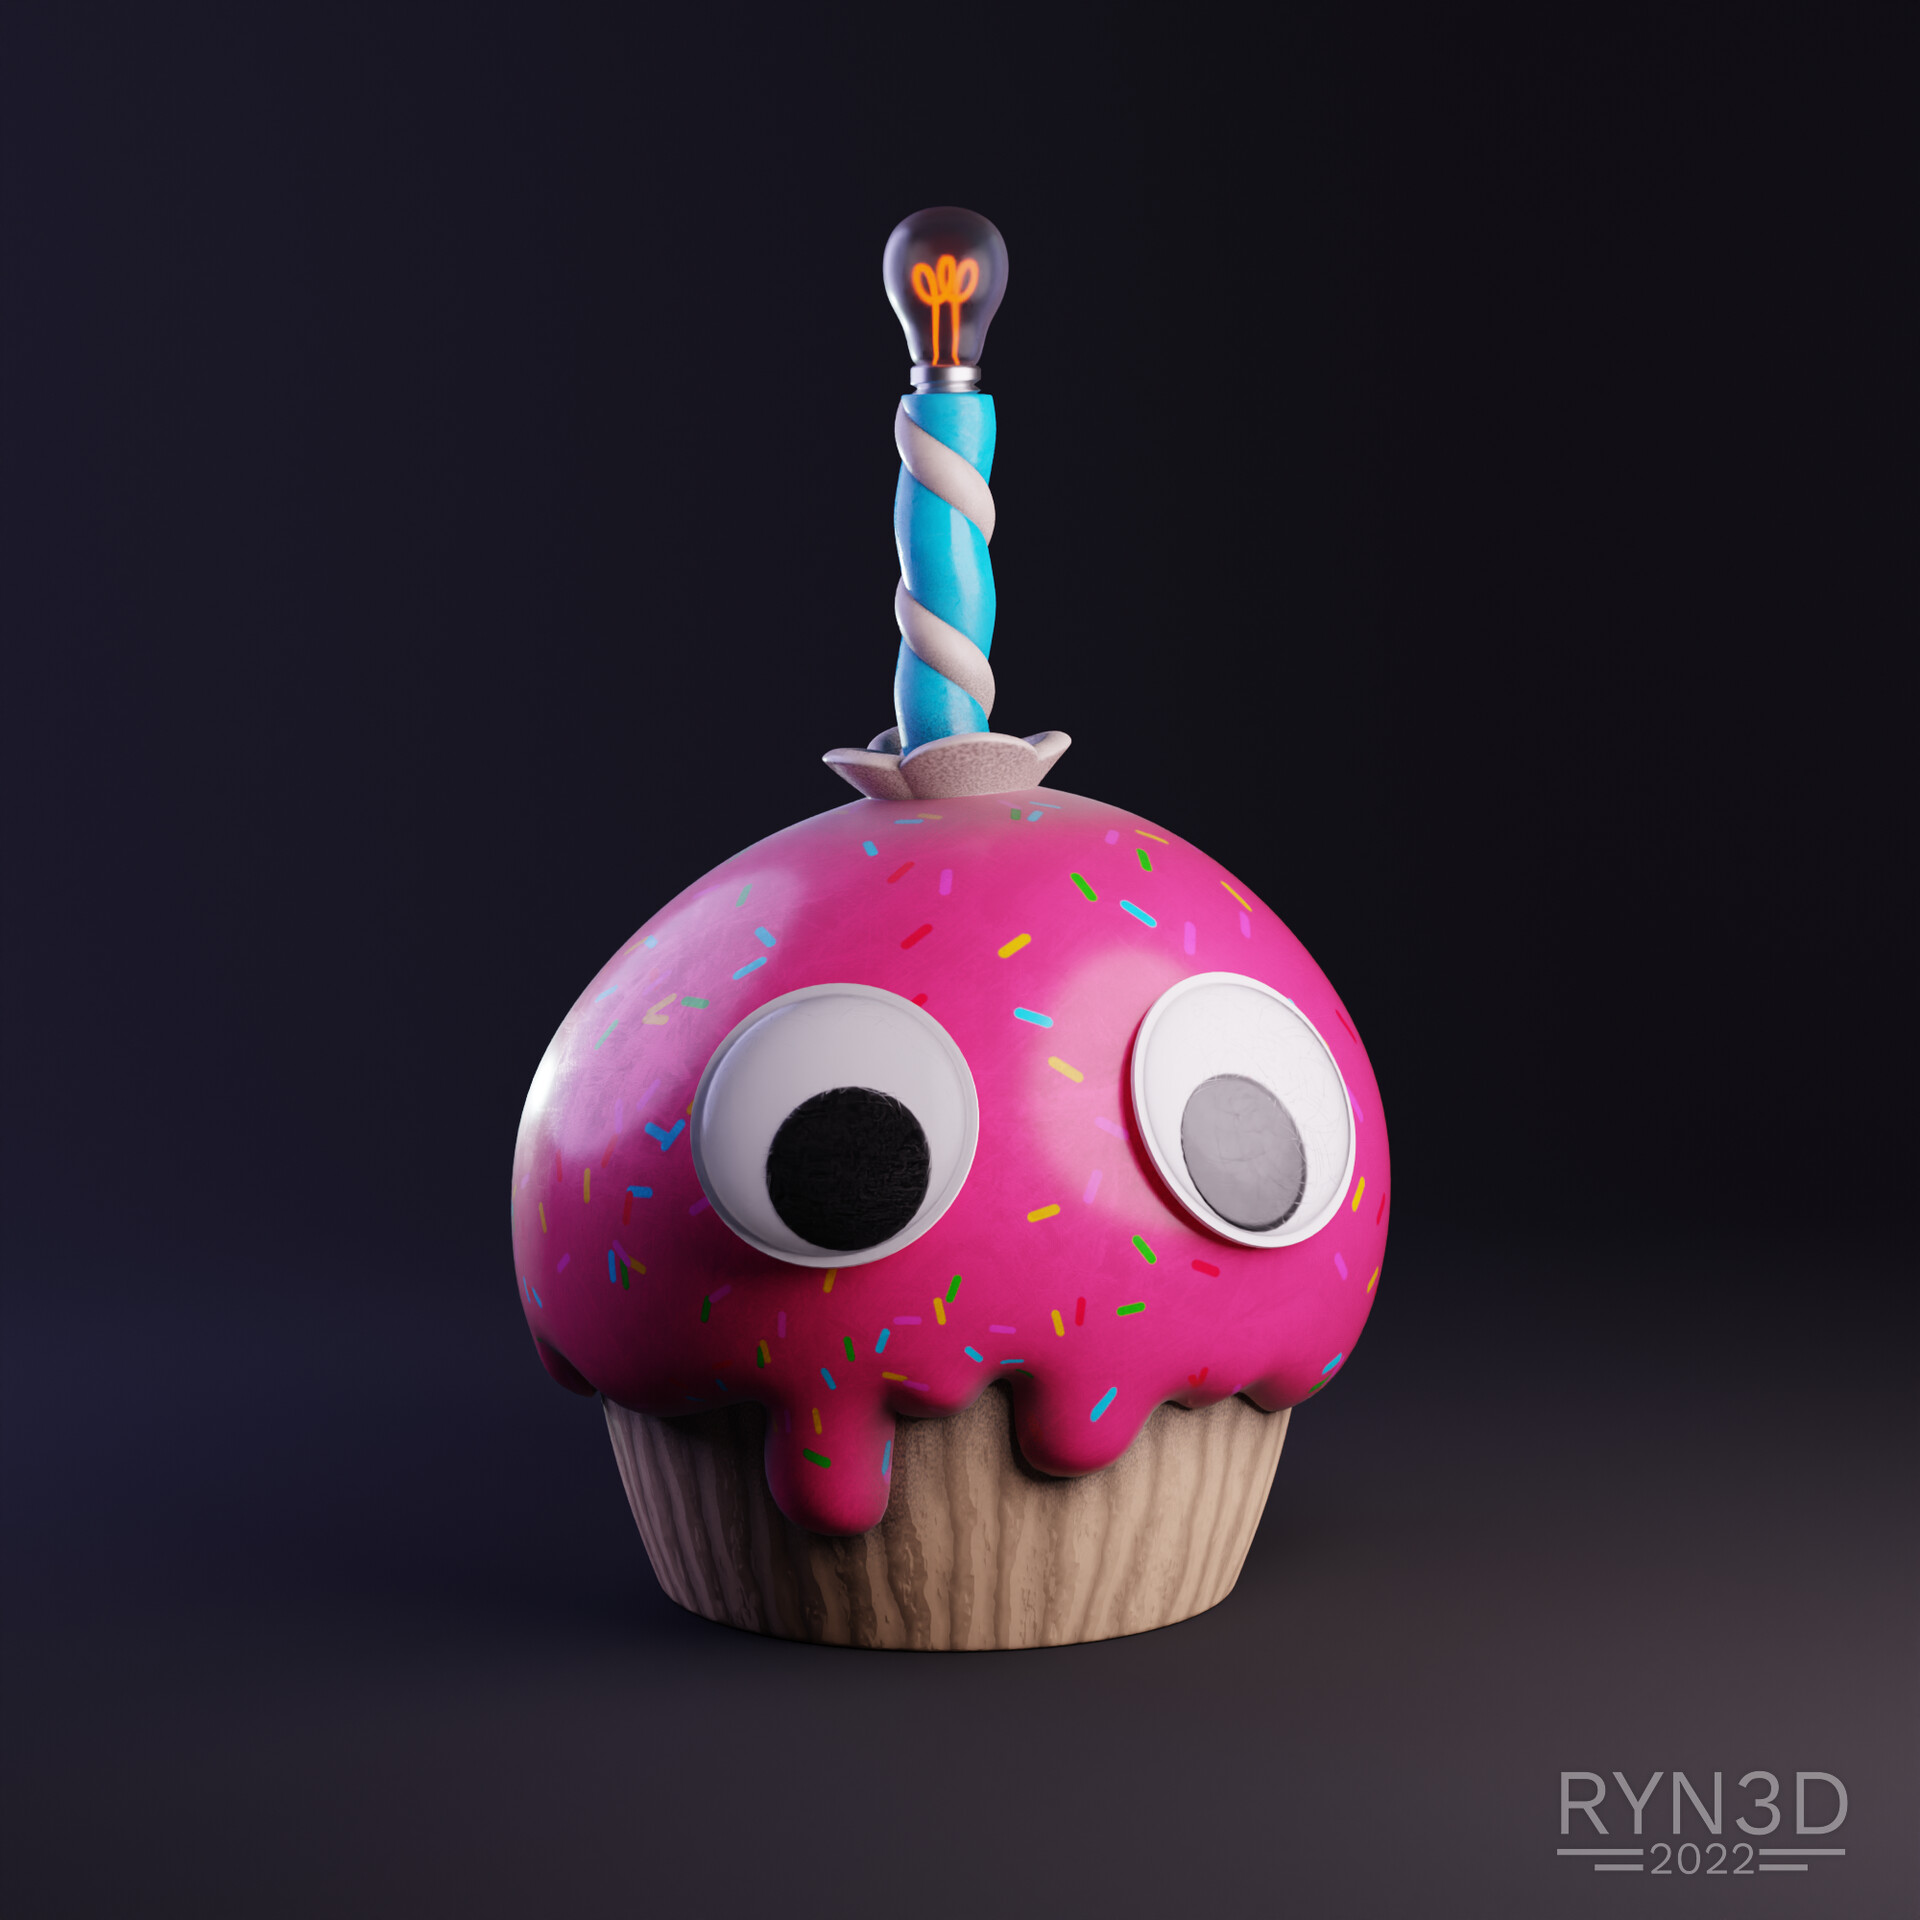 Mr. Cupcake (aka Carl) from Five Nights at Freddy's Explained